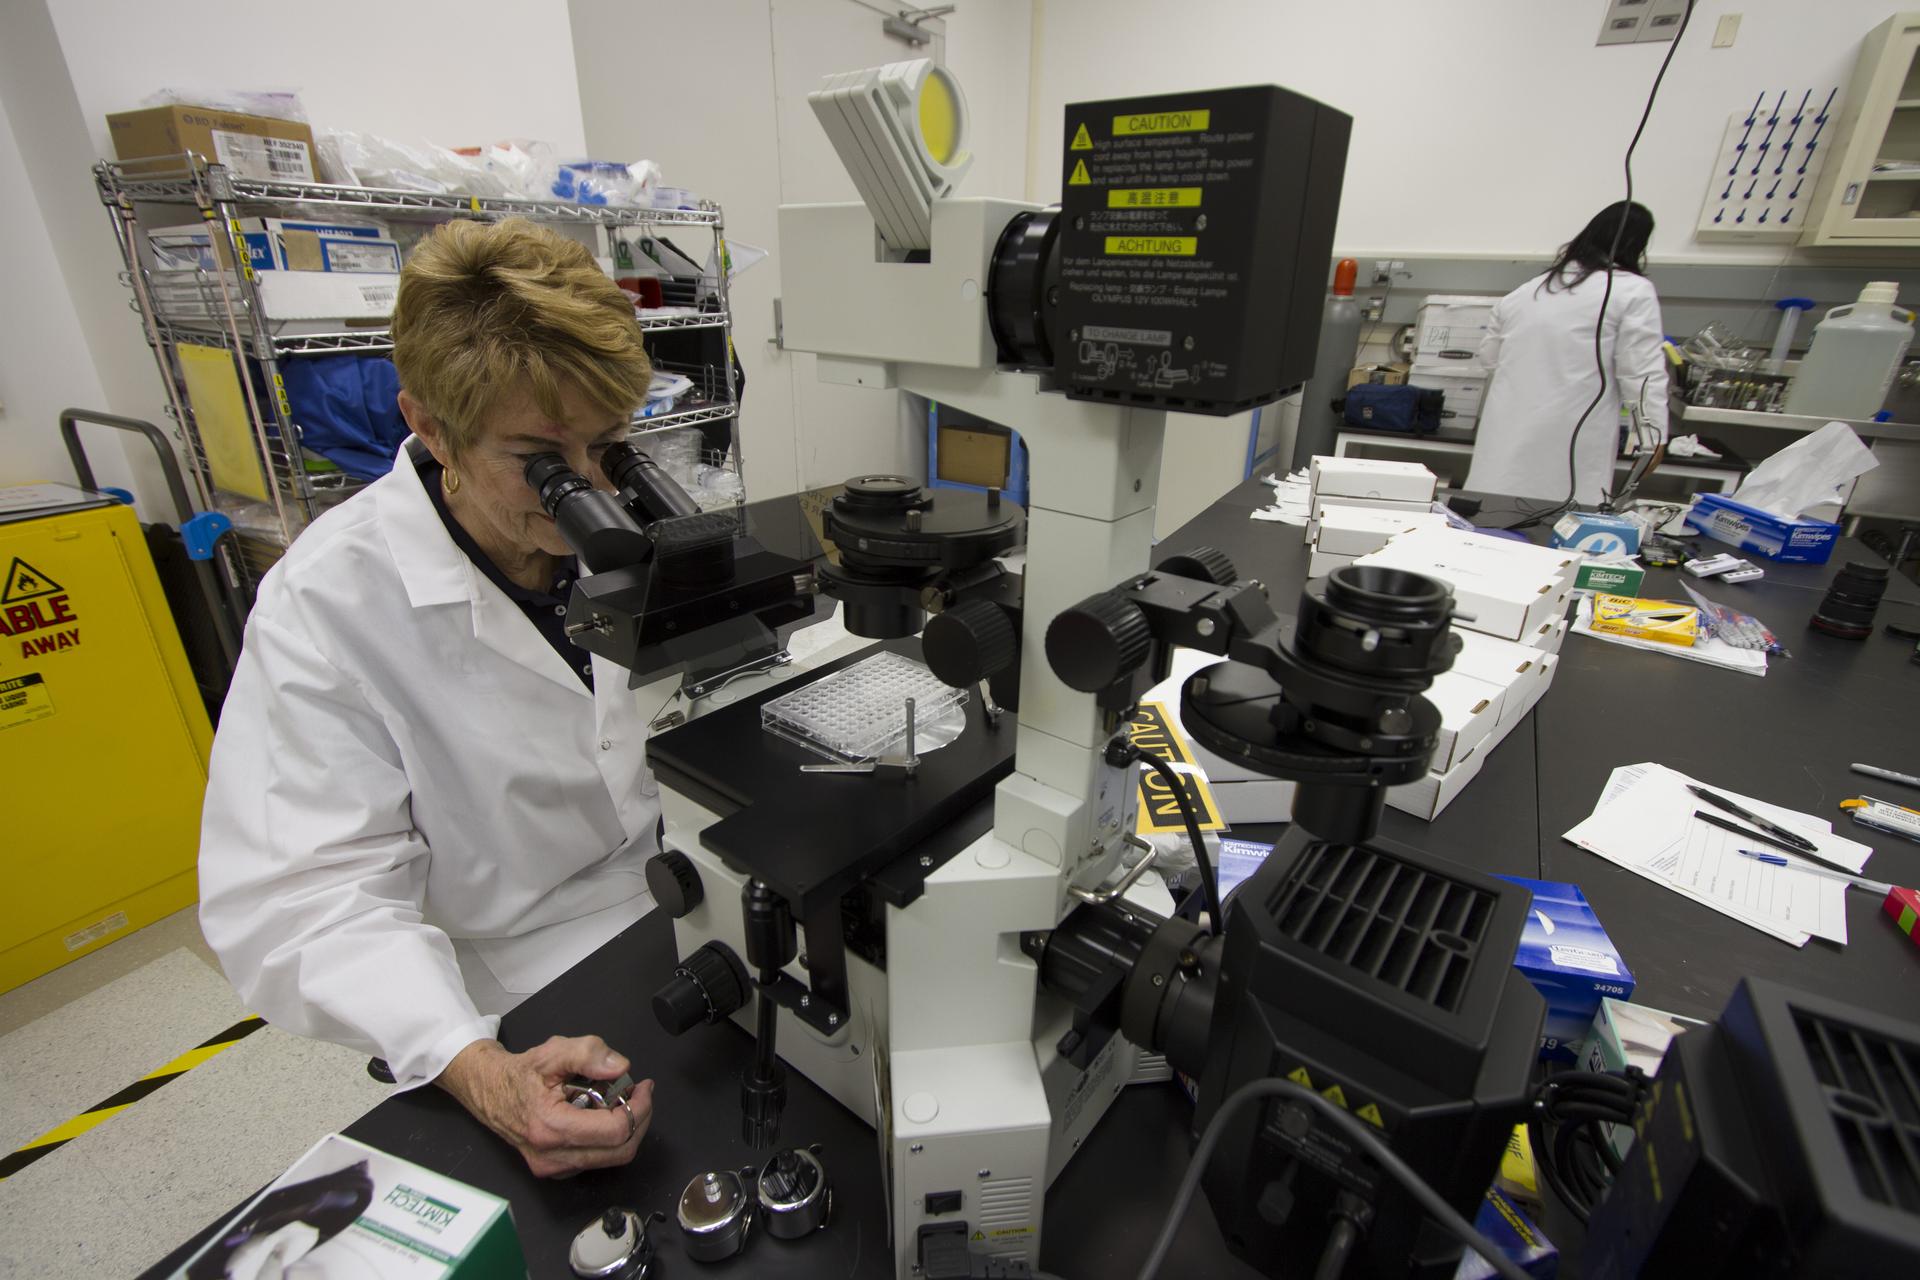 A woman wearing a lab coat and looking through a microscope.